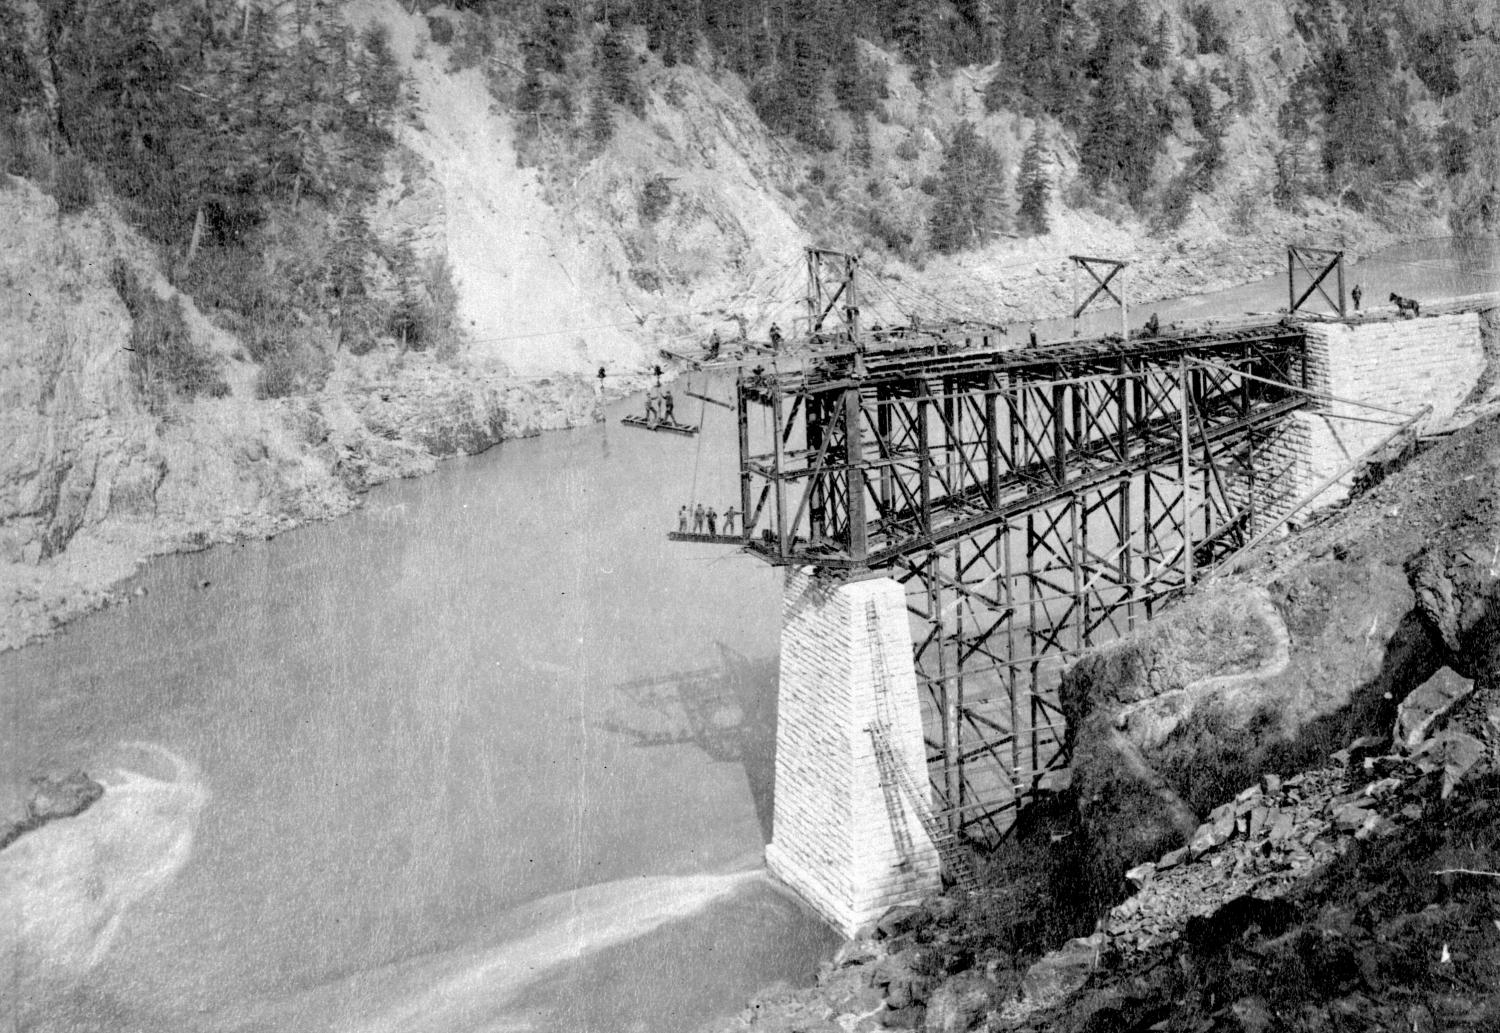 A railway bridge being constructed over a river